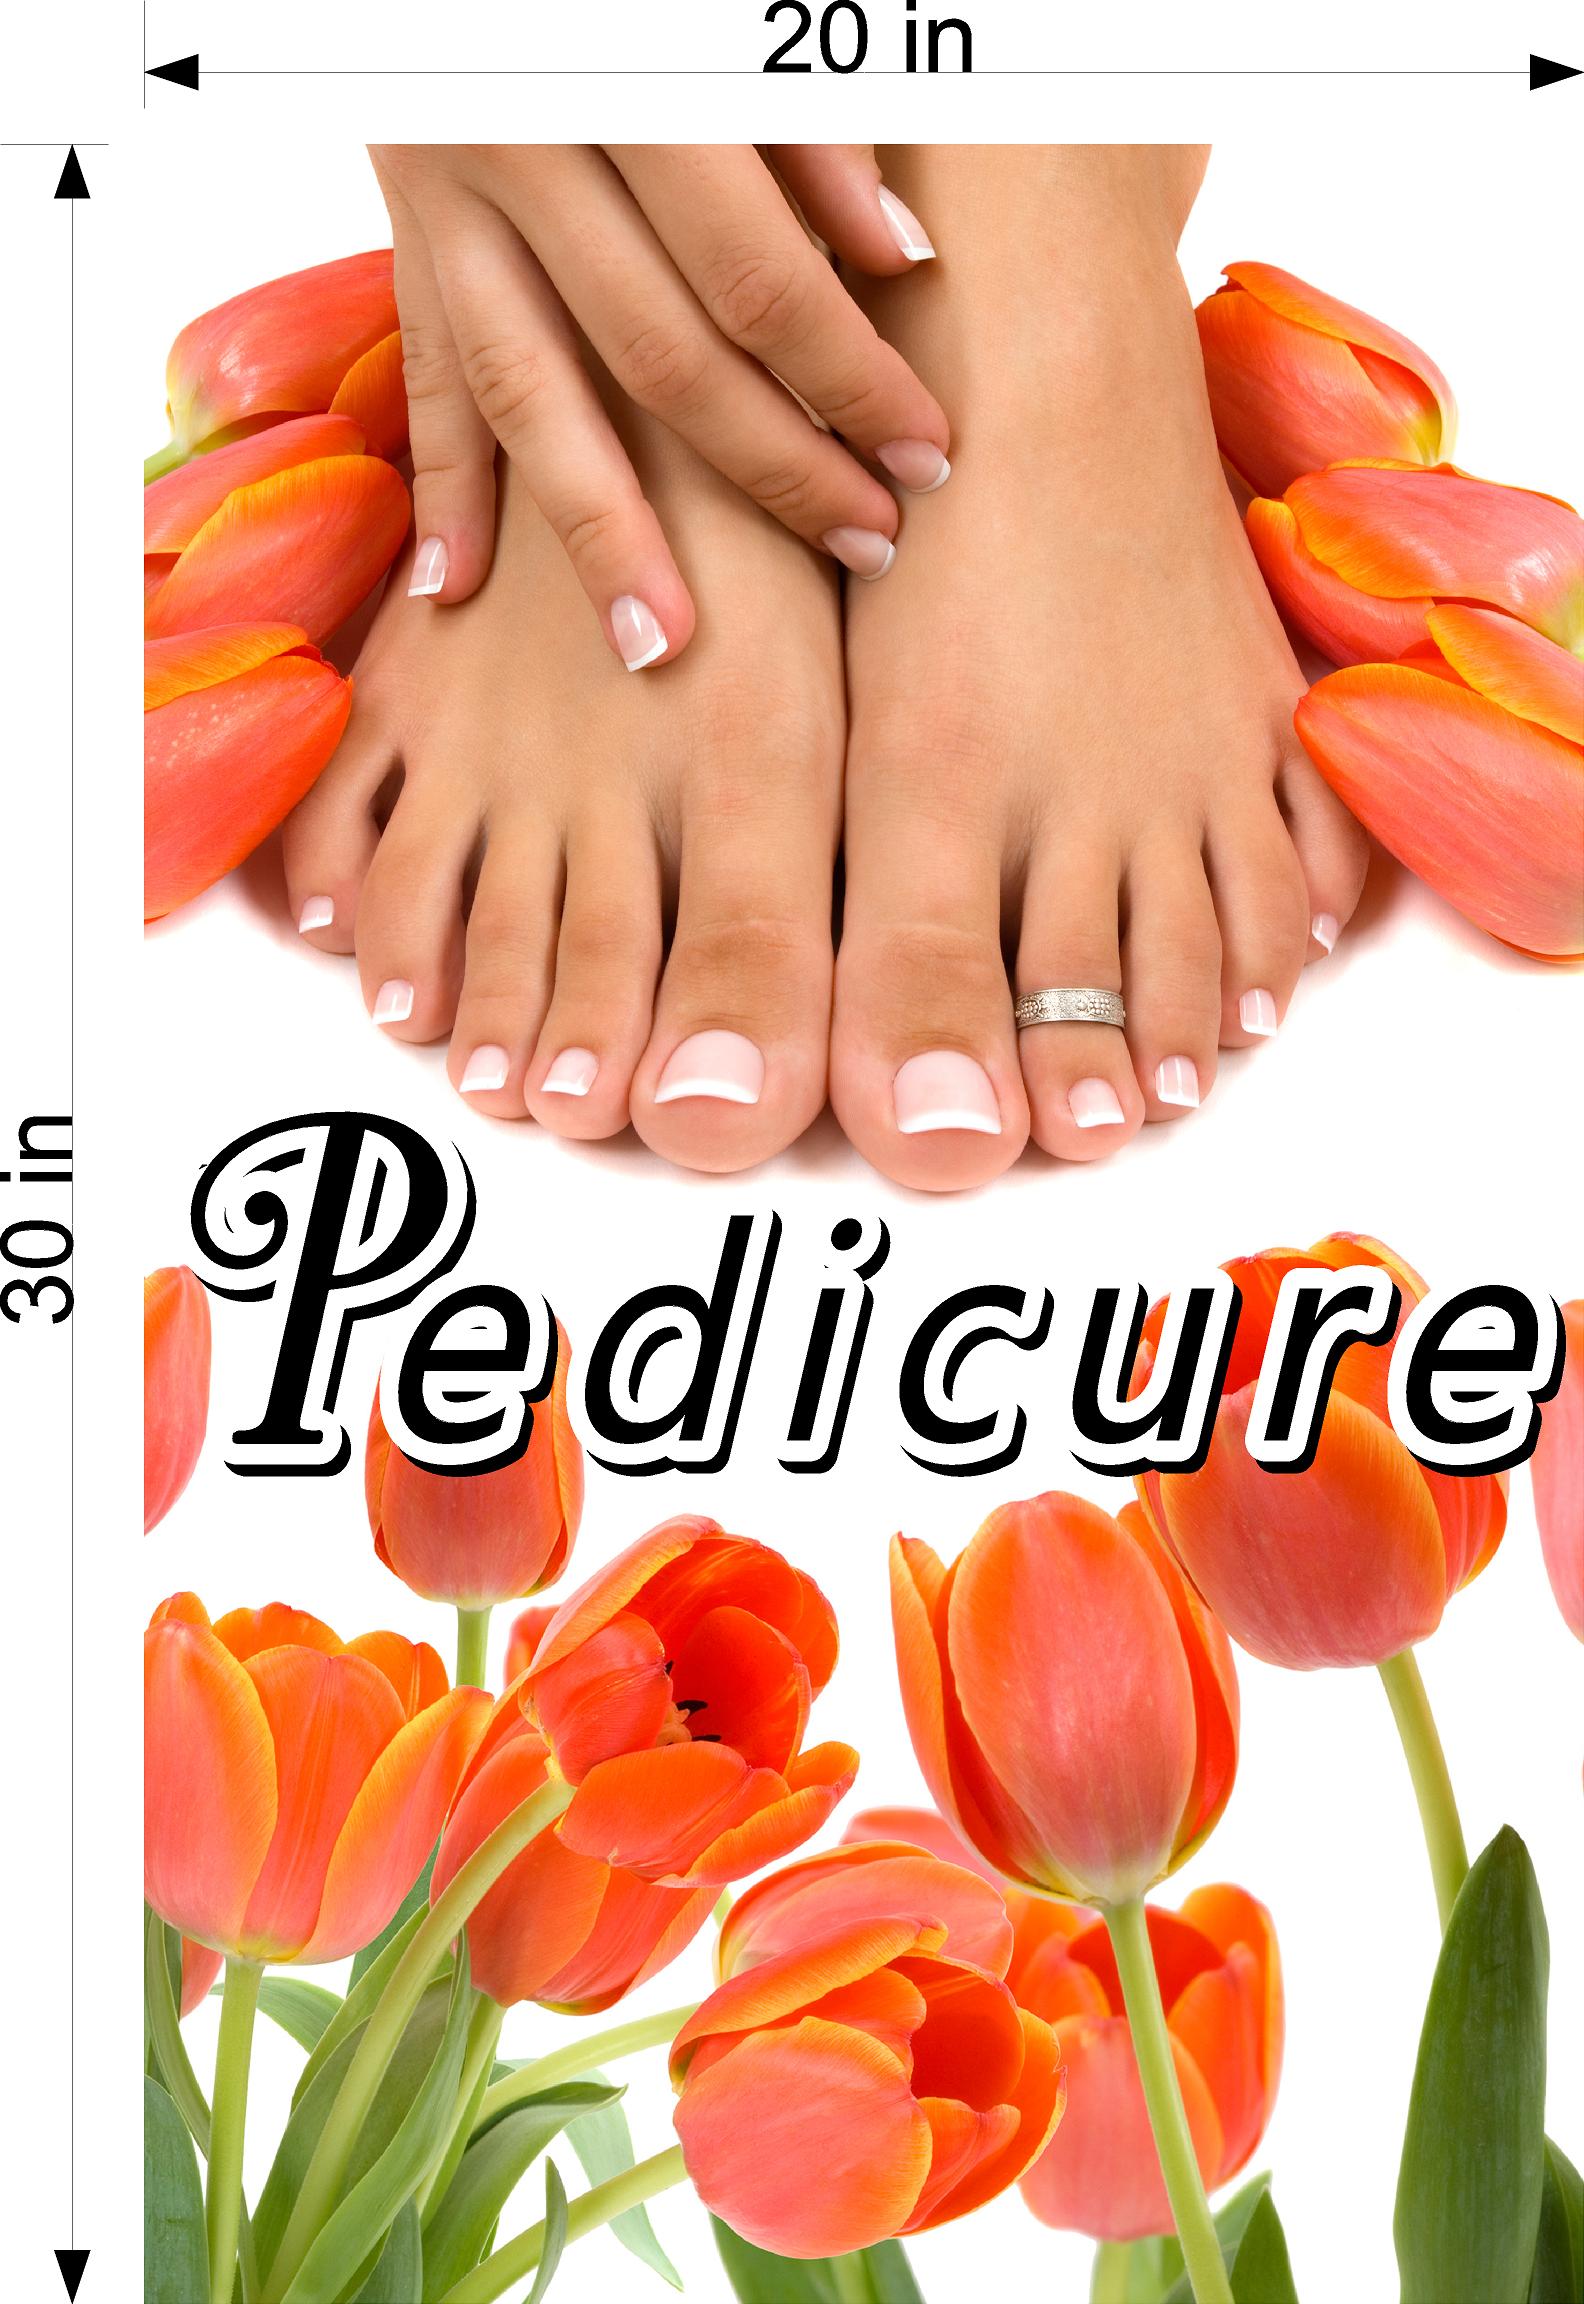 Pedicure 23 Wallpaper Fabric Poster Decal with Adhesive Backing Wall Sticker Decor Indoors Interior Sign Vertical